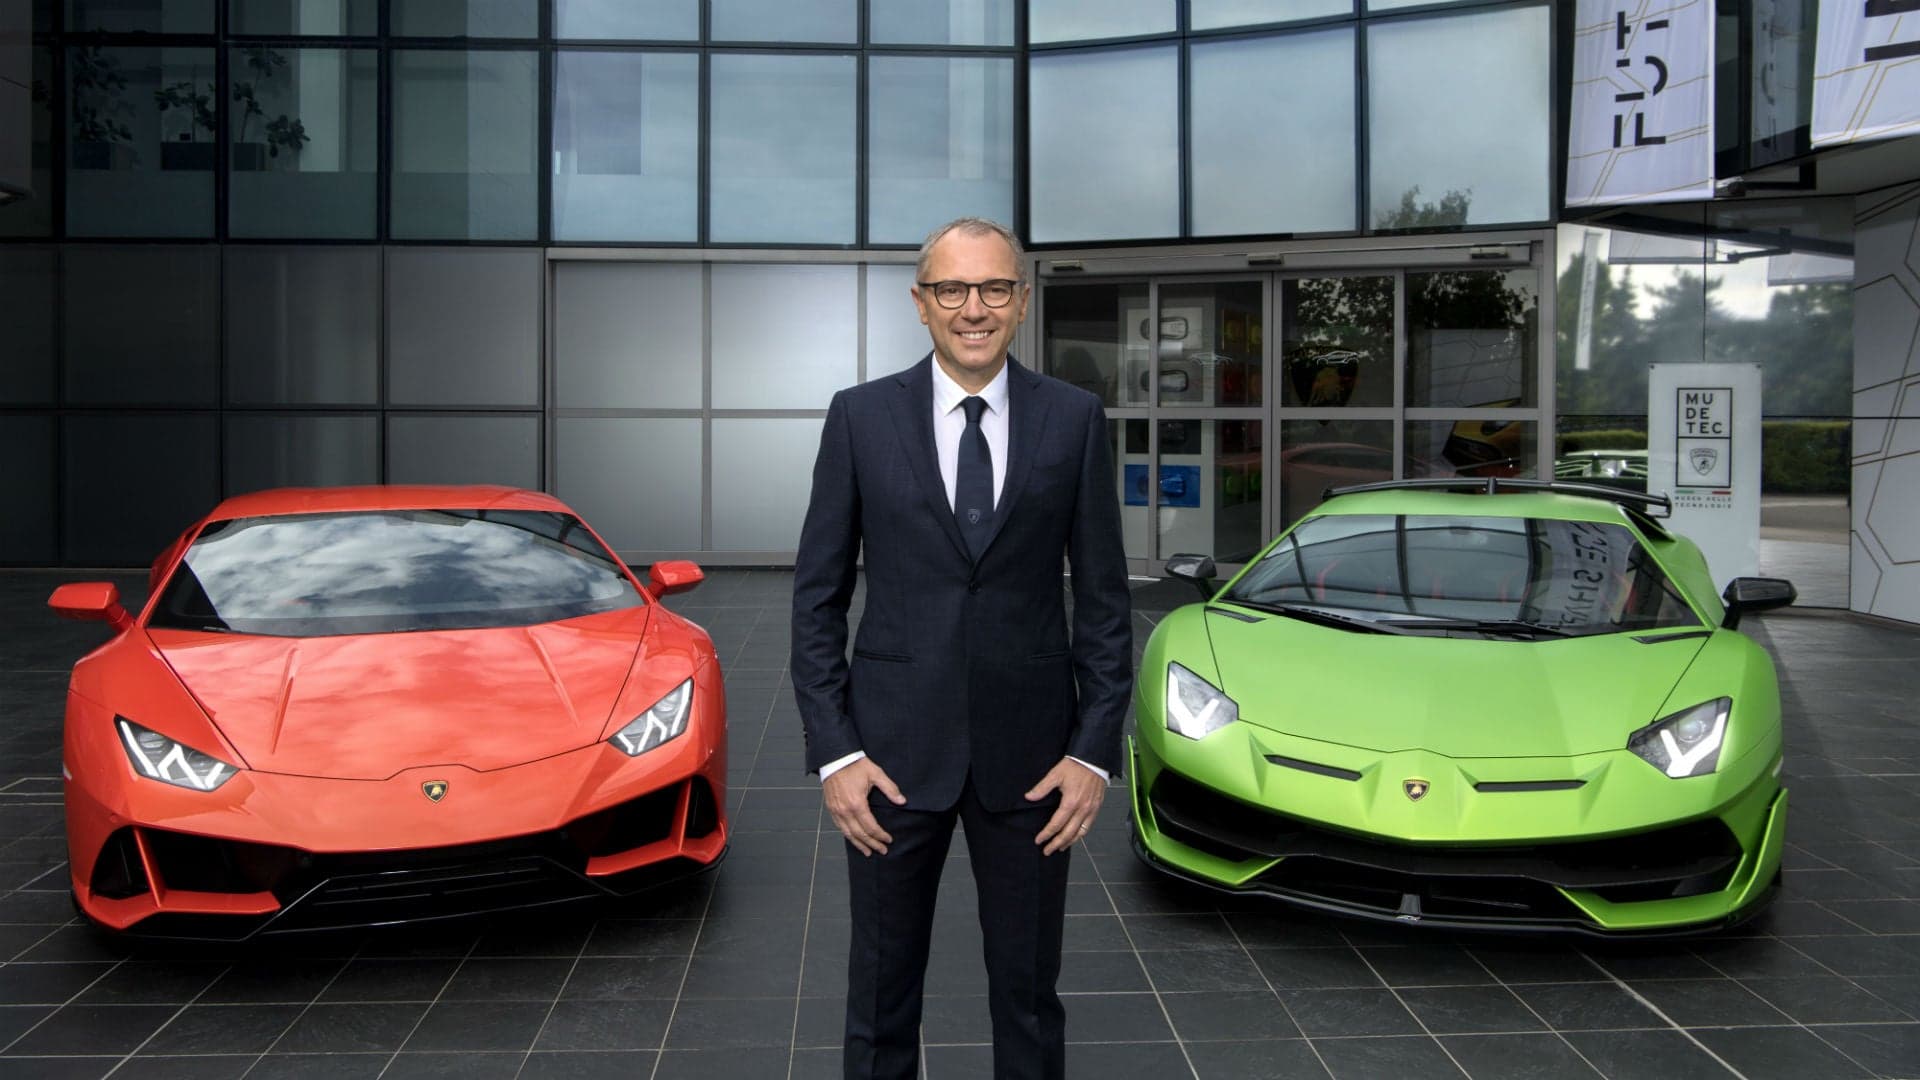 Lamborghini Is Sending Carbon Fiber Components to Space in the Name of Research